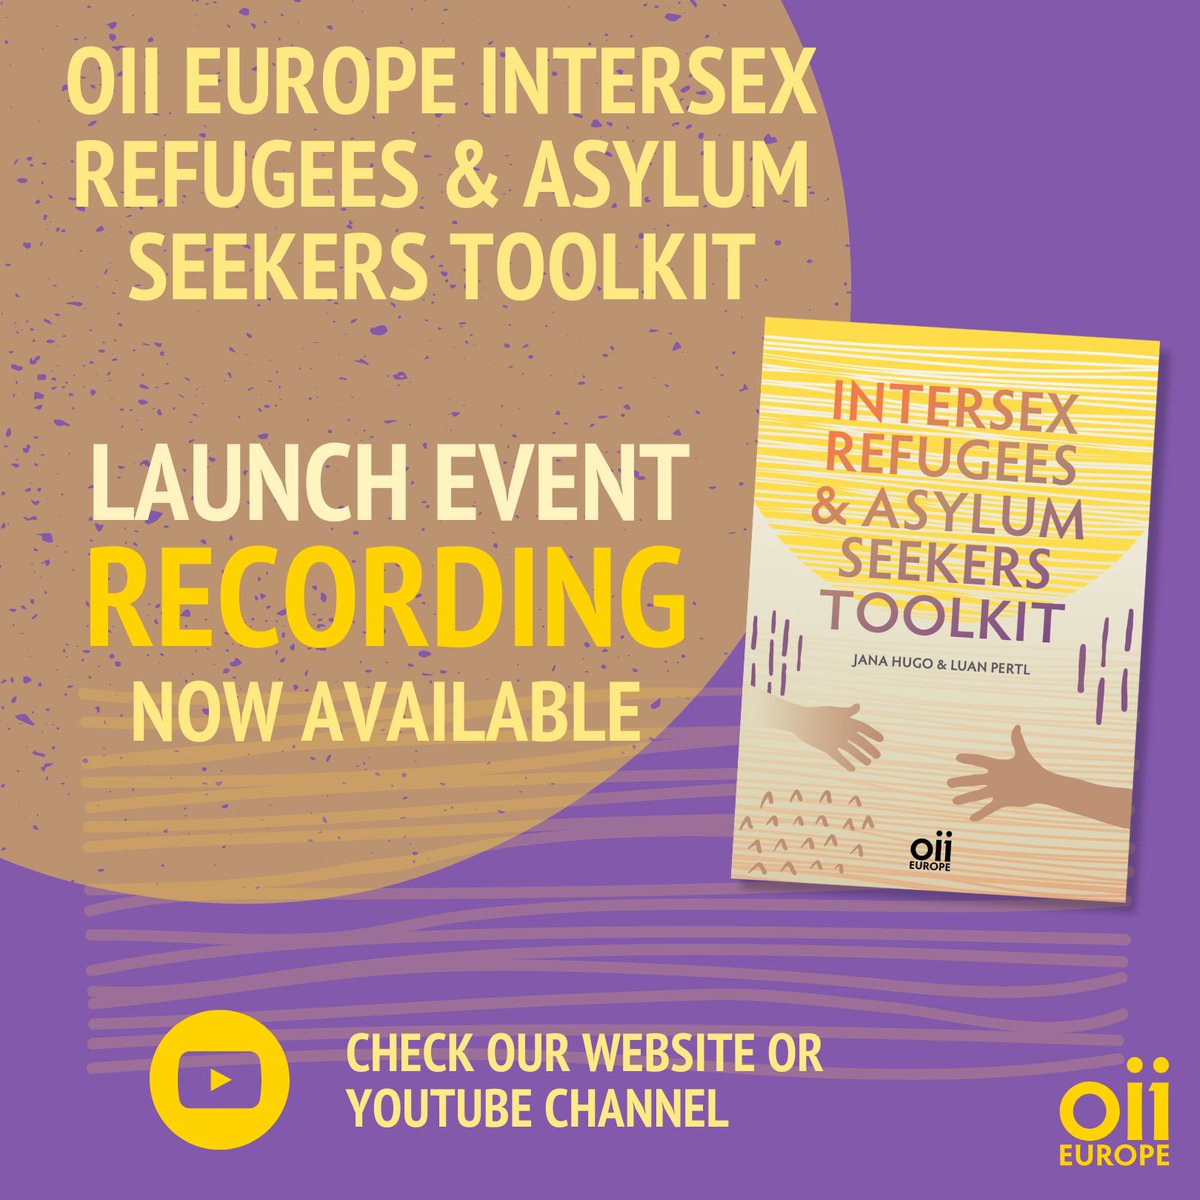 Today we are happy to share with to you the video recording of the online launch event from March 26, of our new publication, the Intersex Refugees & Asylum Seekers Toolkit. 🎥 oiieurope.org/intersex-refug… #intersex #refugees #asylumseekers